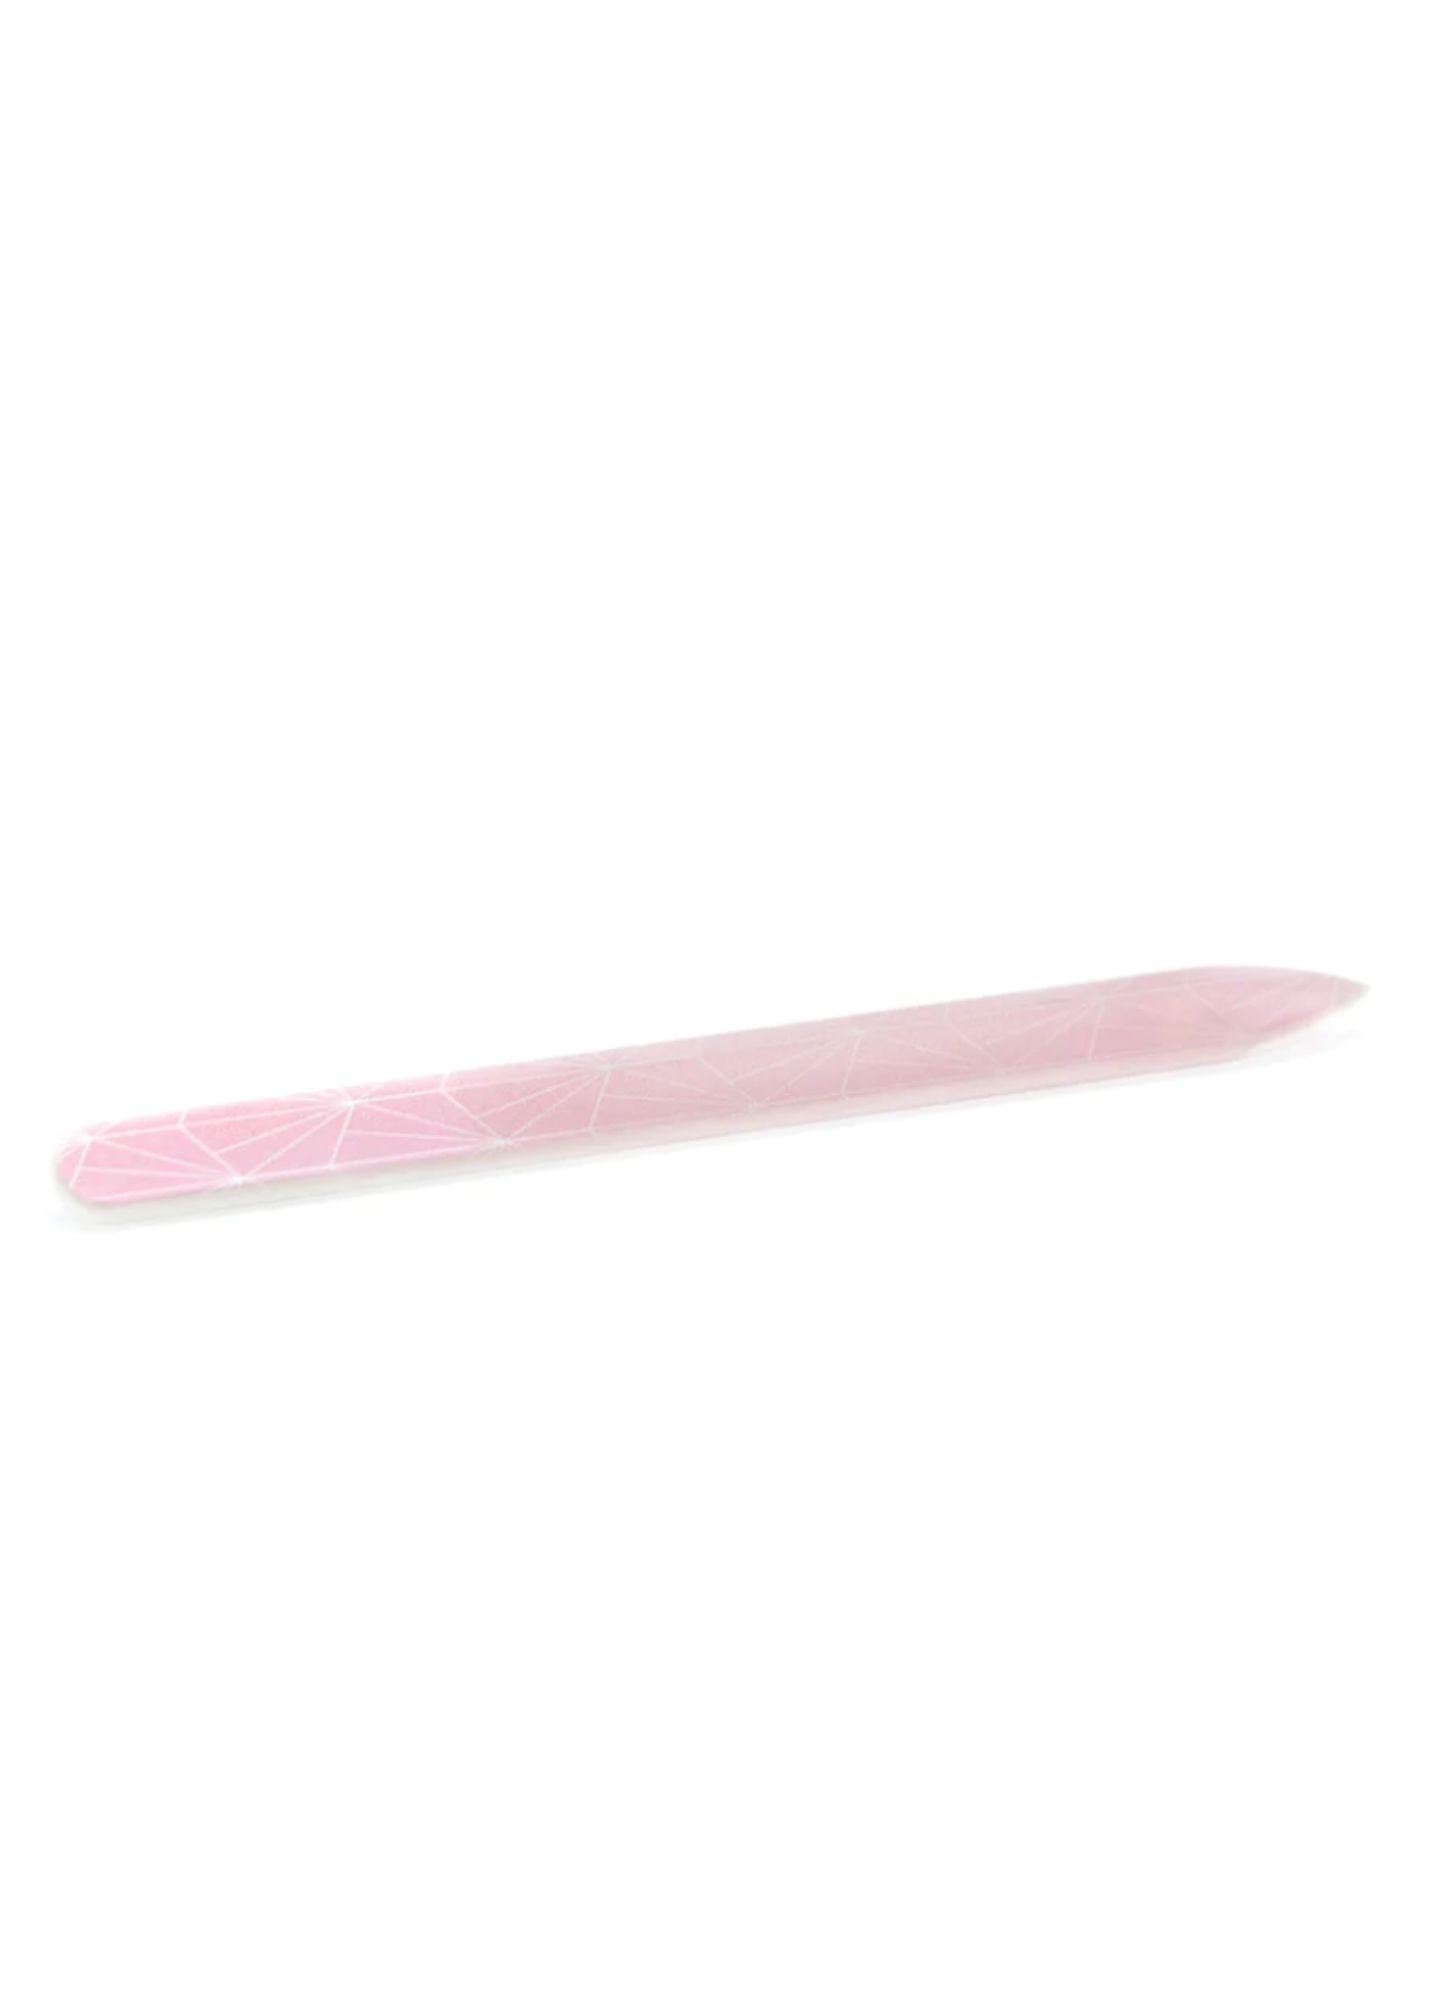 Colorful Glass Nail File Gifts Pale Pink